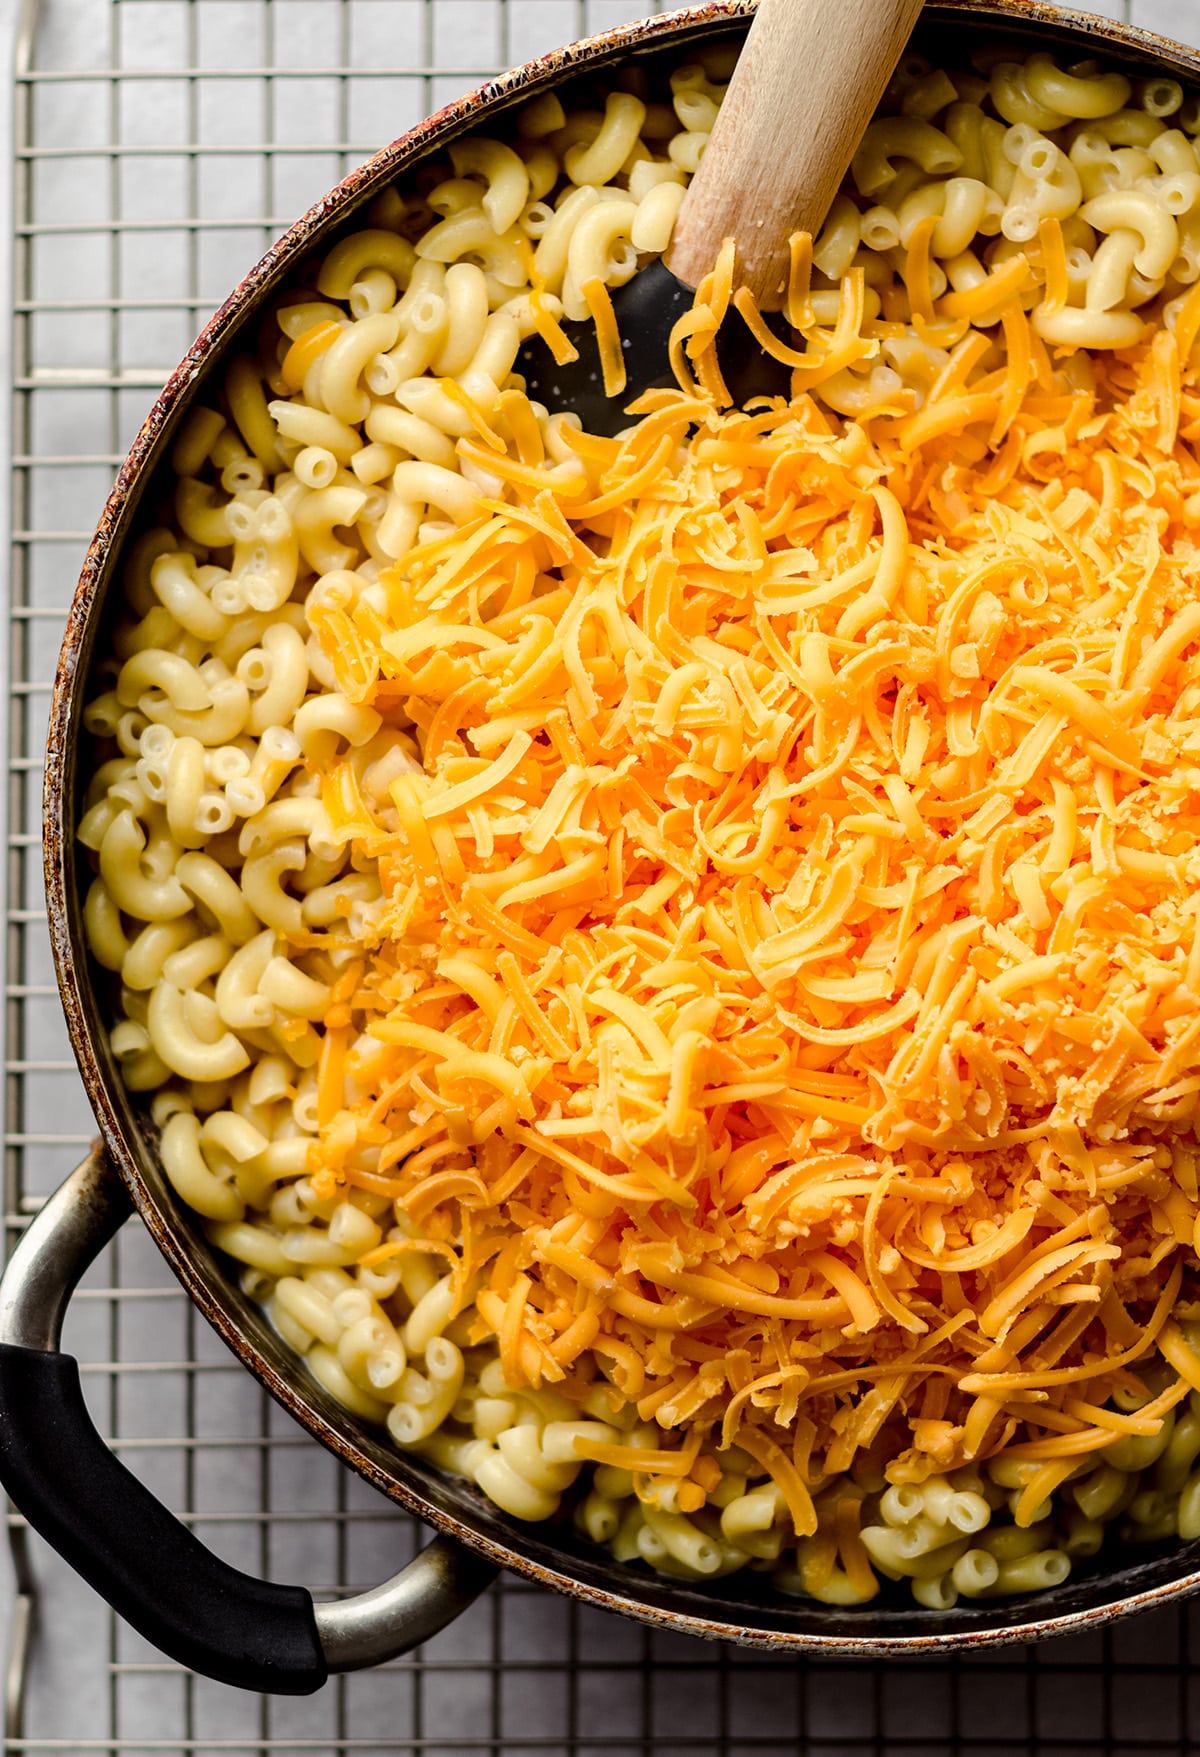 An overhead view of a skillet with cooked macaroni, topped with shredded cheese.